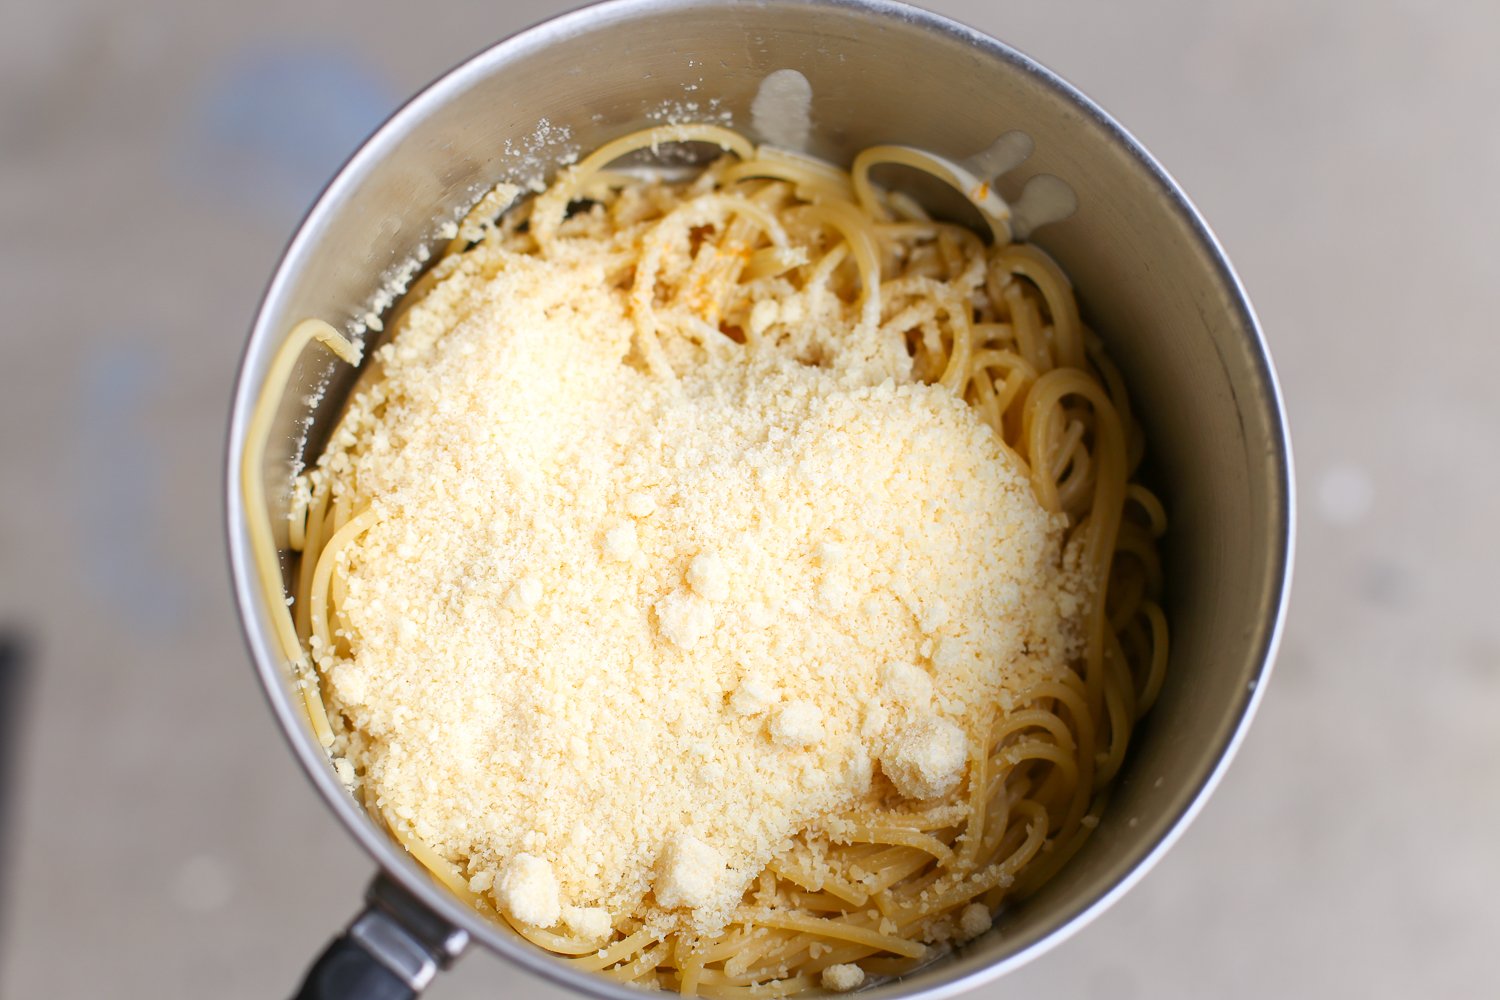 Parmesan cheese over the top of cooked pasta in a saucepan.